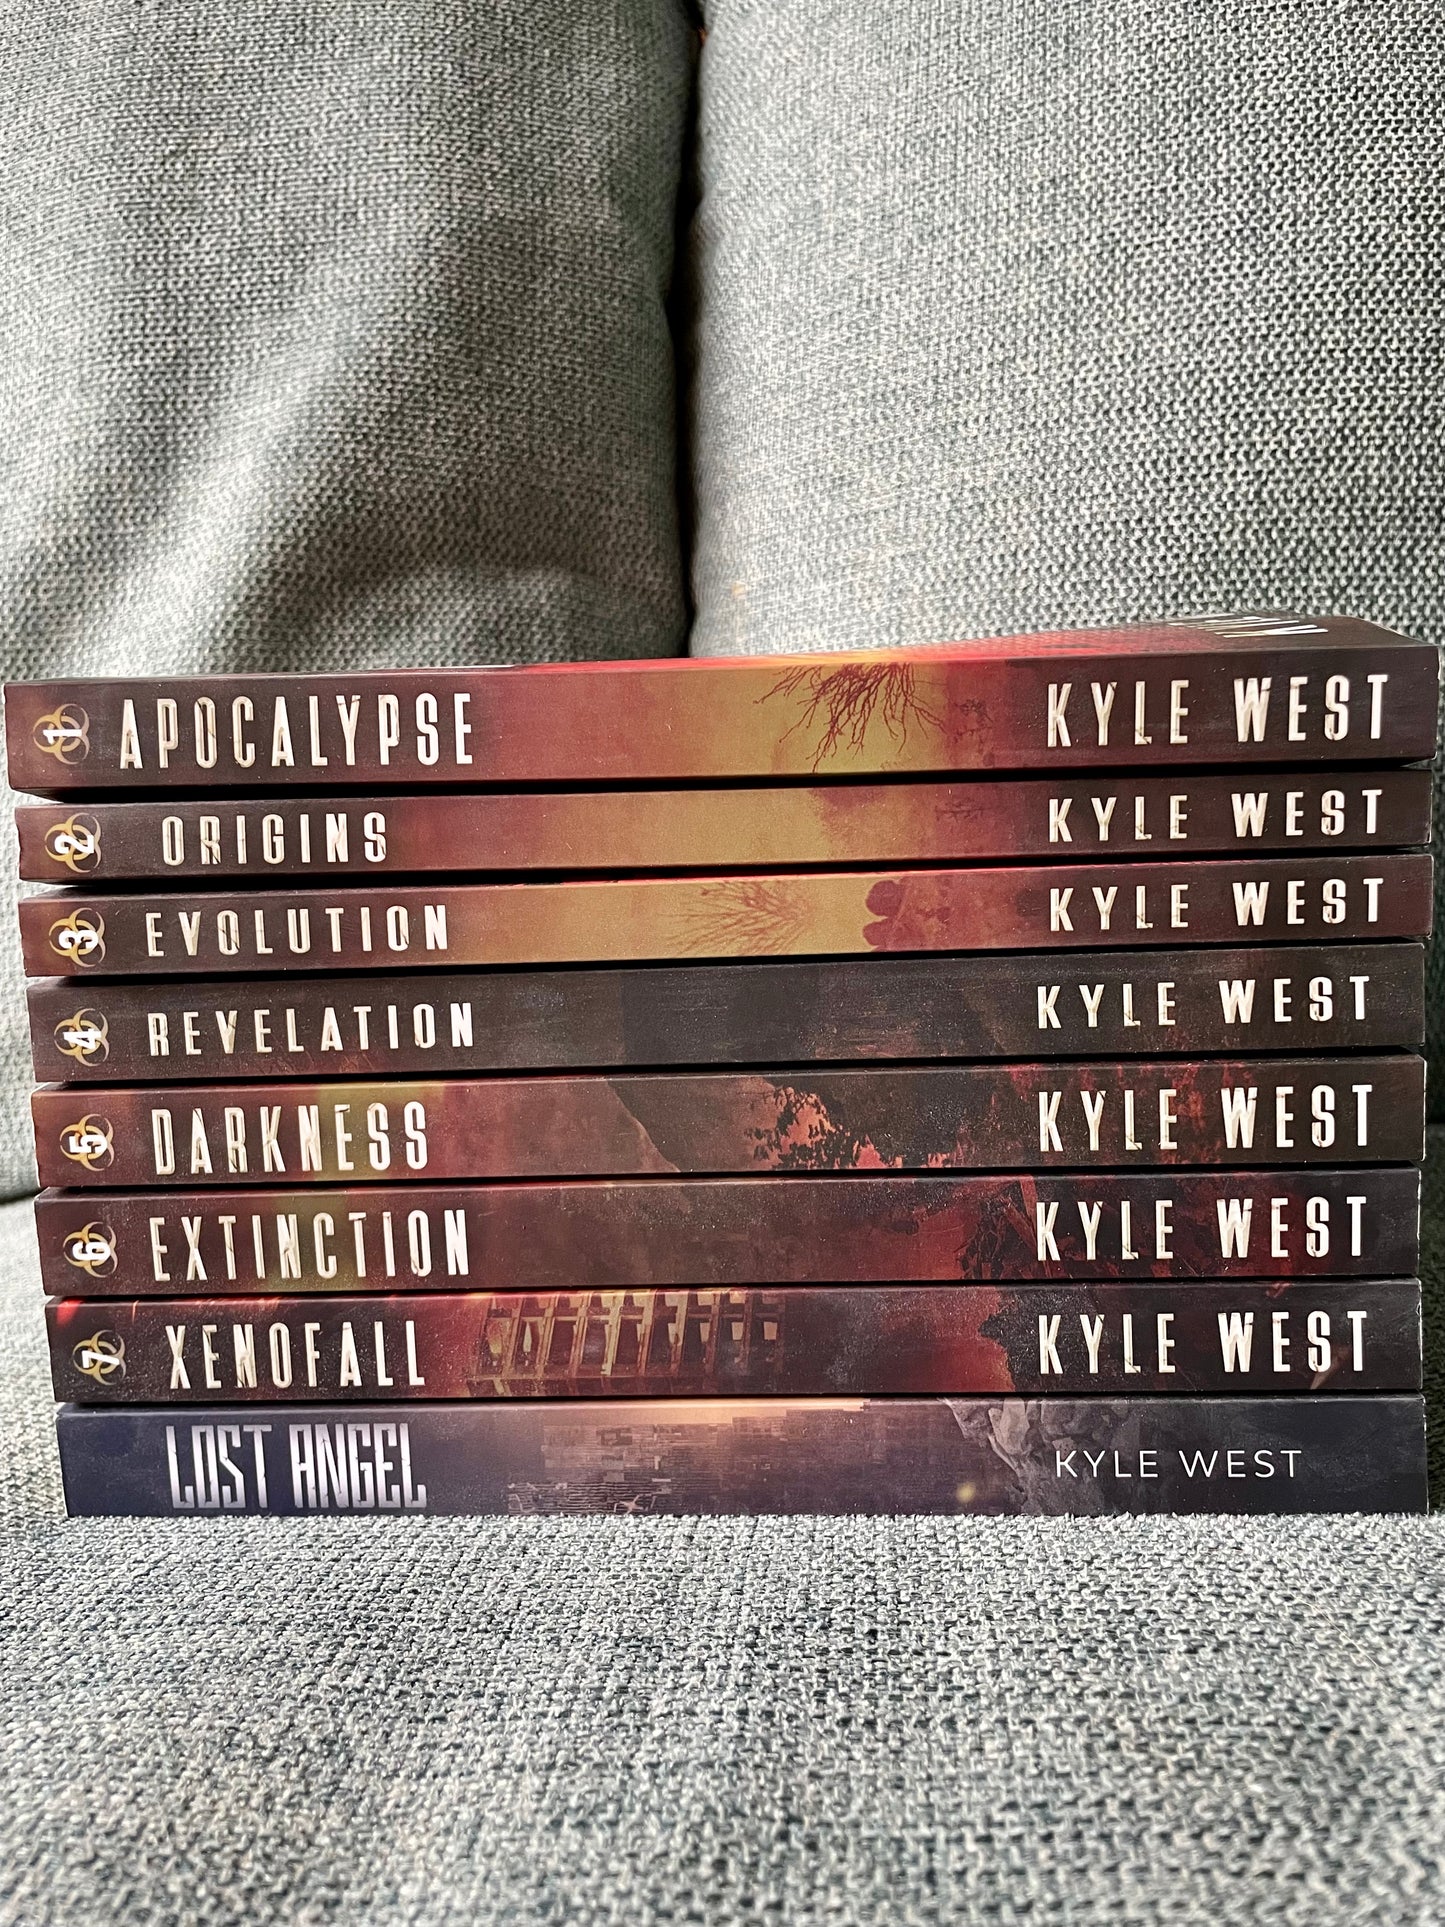 The Wasteland Chronicles: The Complete Signed Paperback Set